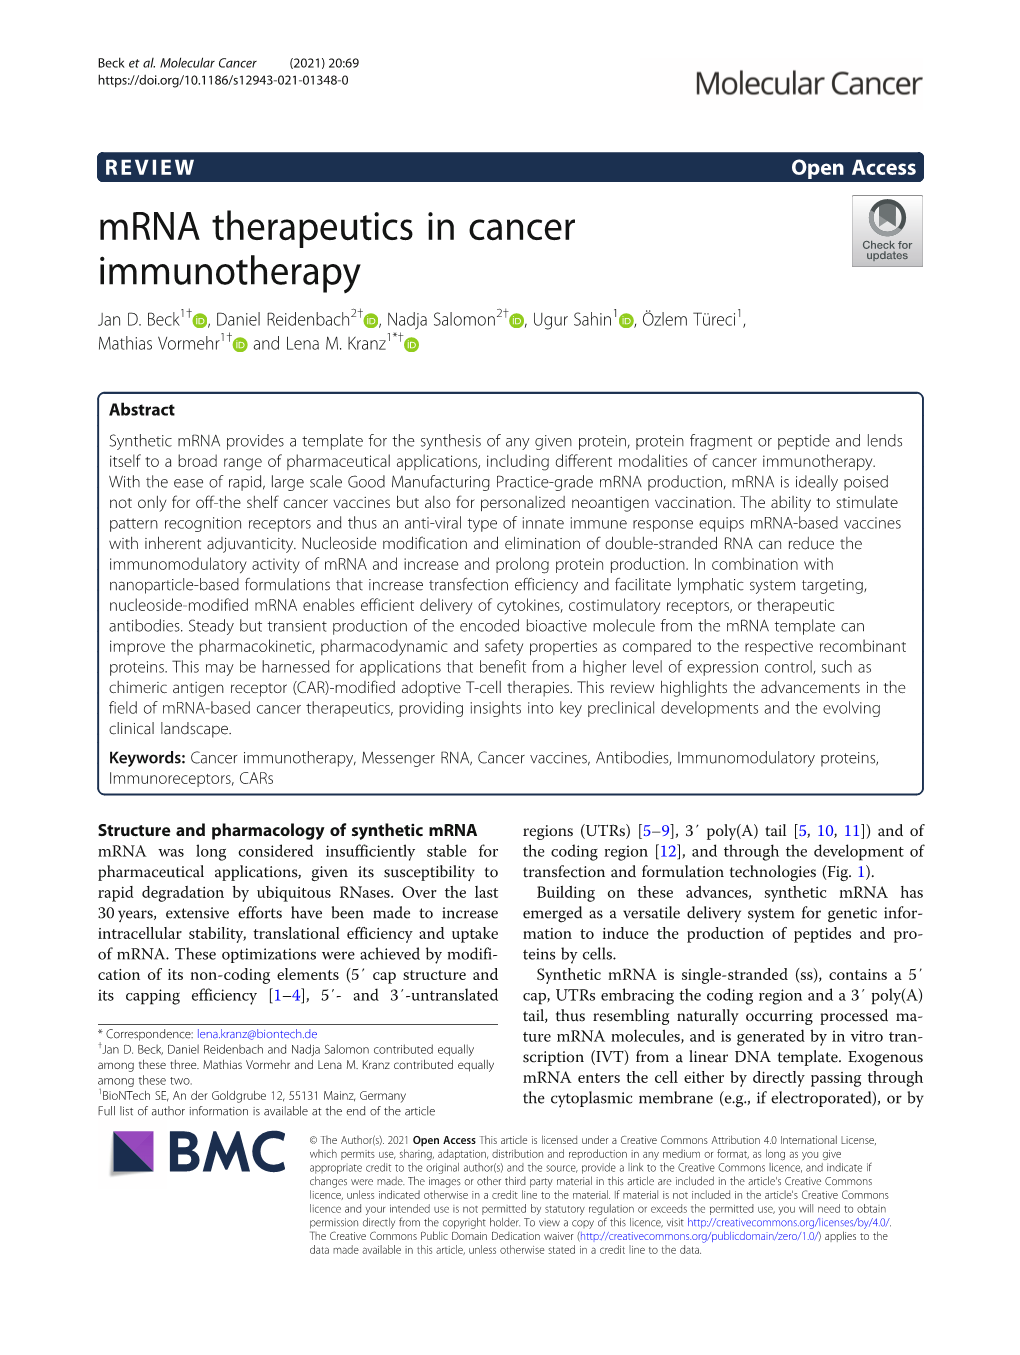 Mrna Therapeutics in Cancer Immunotherapy Jan D